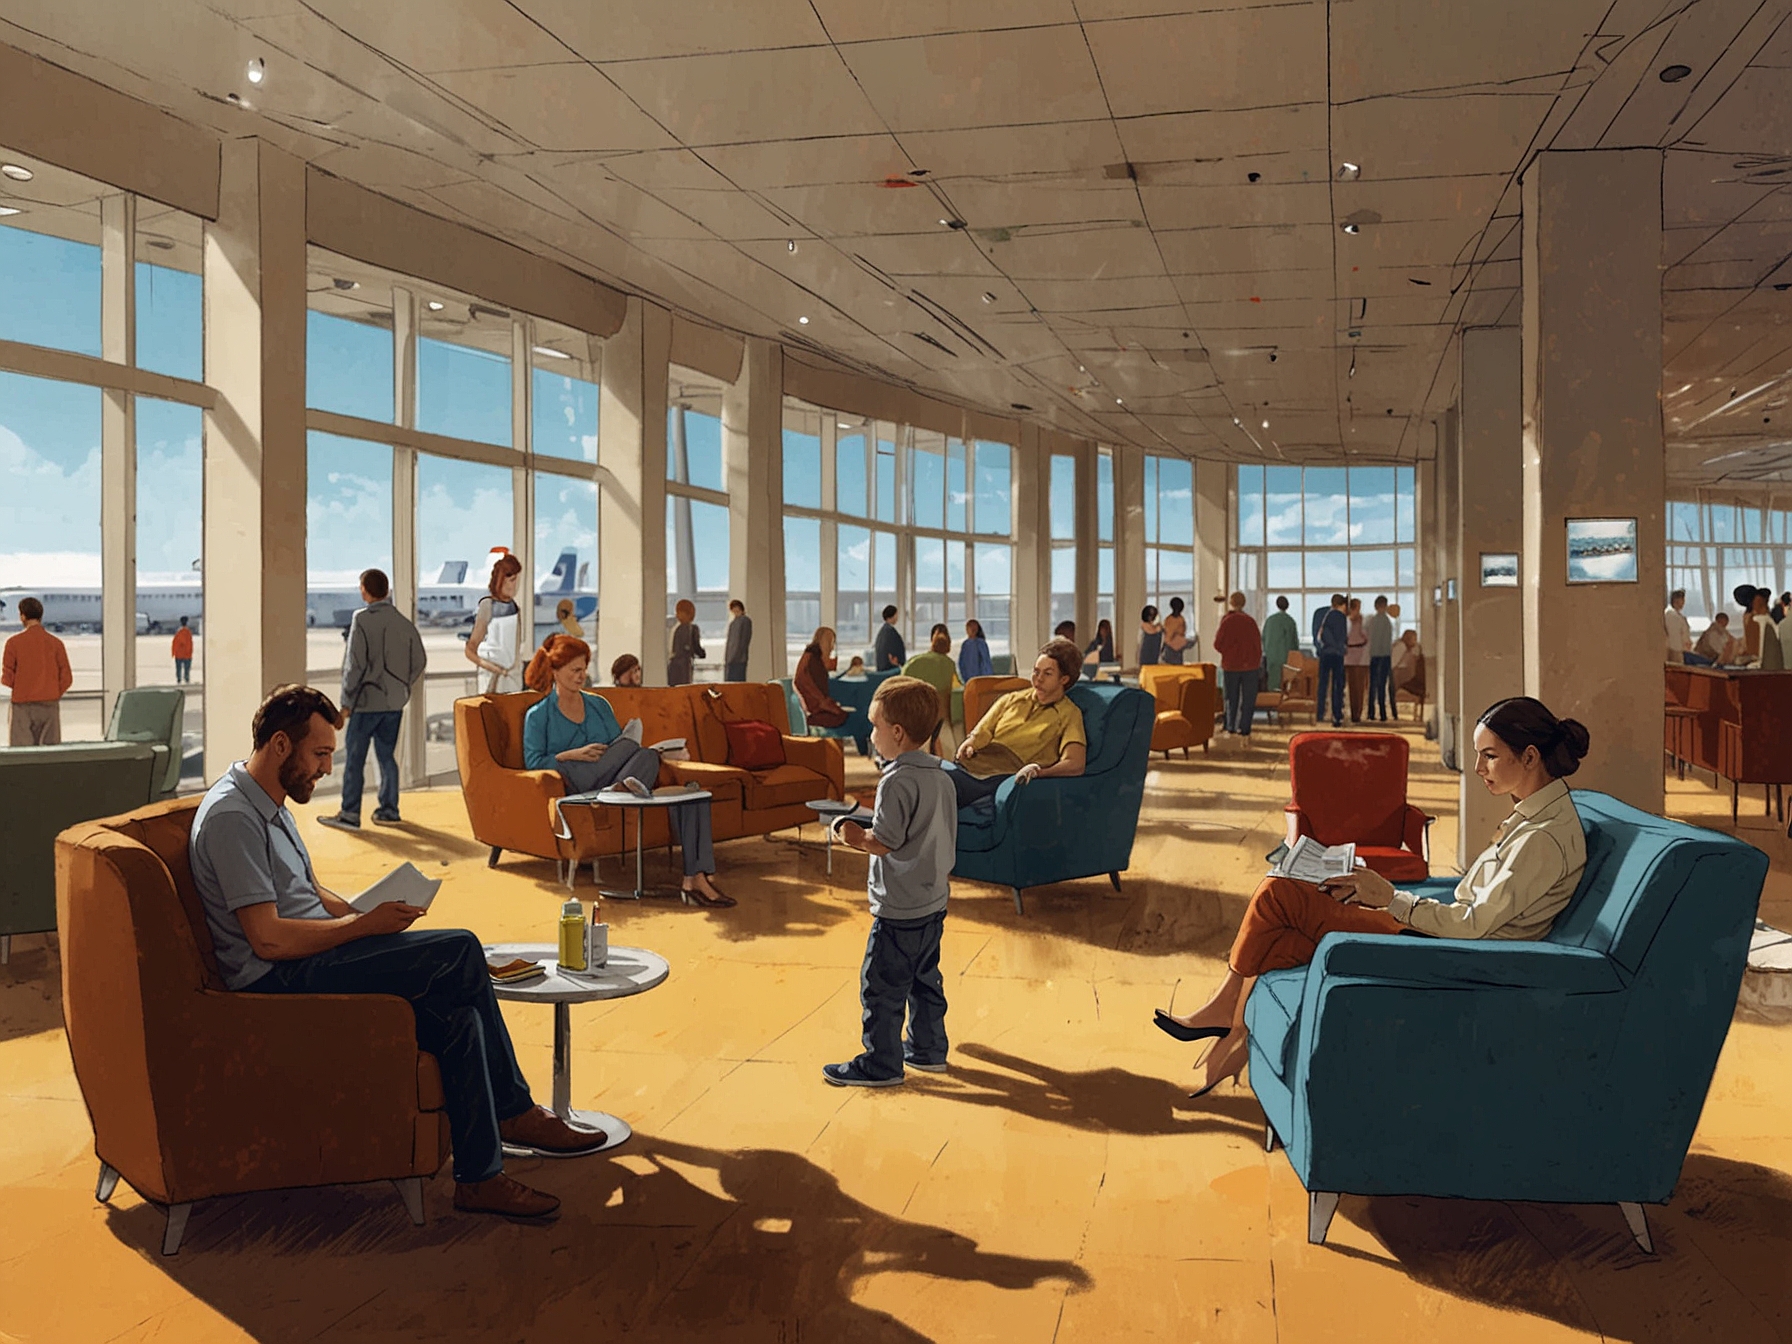 An illustration showing a busy airport lounge with both adults working quietly and a family area with children playing, highlighting the debate on accommodating diverse needs.